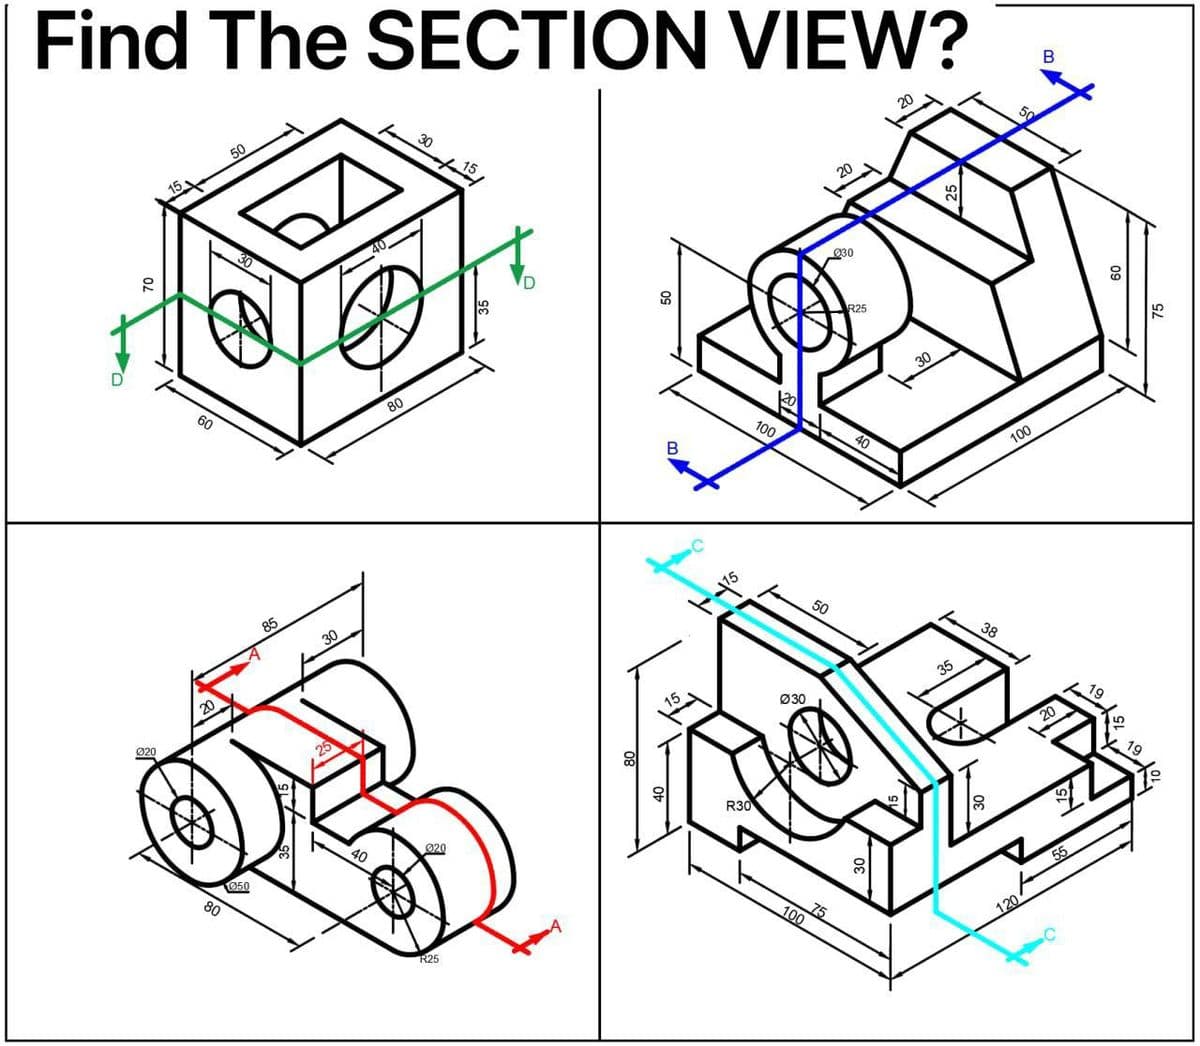 Find The SECTION VIEW?
20
20
230
R25
75
60
80
100
40
100
15
50
30
38
35
Ø30
19
|15
20
Ø20
R30
30
40
020
050
55
80
75
100
120
R25
